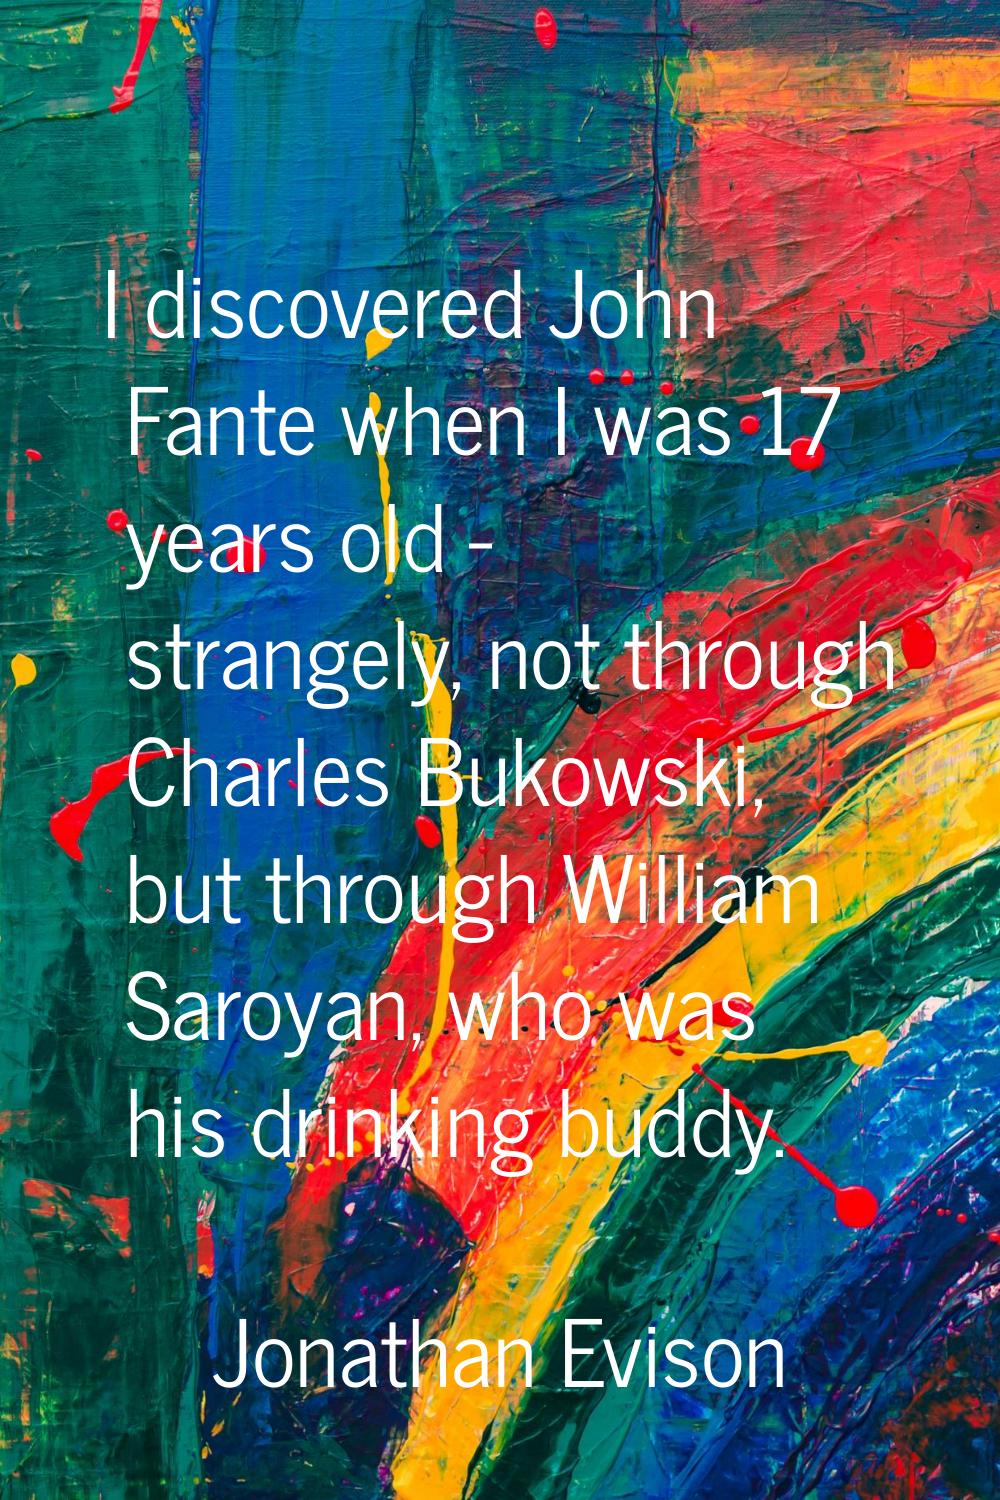 I discovered John Fante when I was 17 years old - strangely, not through Charles Bukowski, but thro